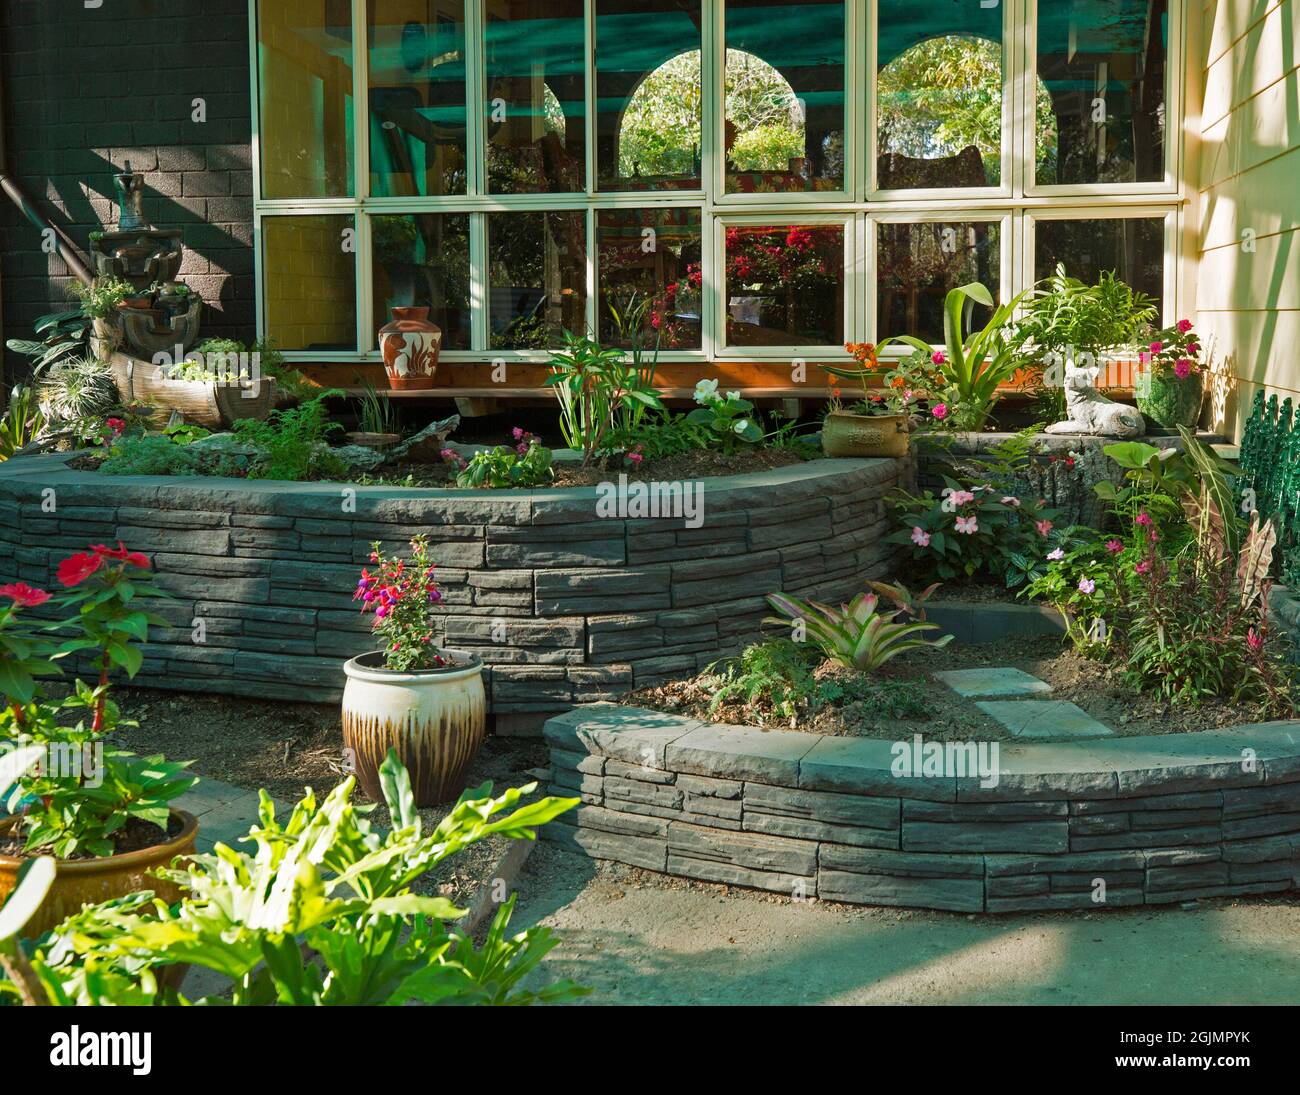 Garden with curved brick walls Stock Photo